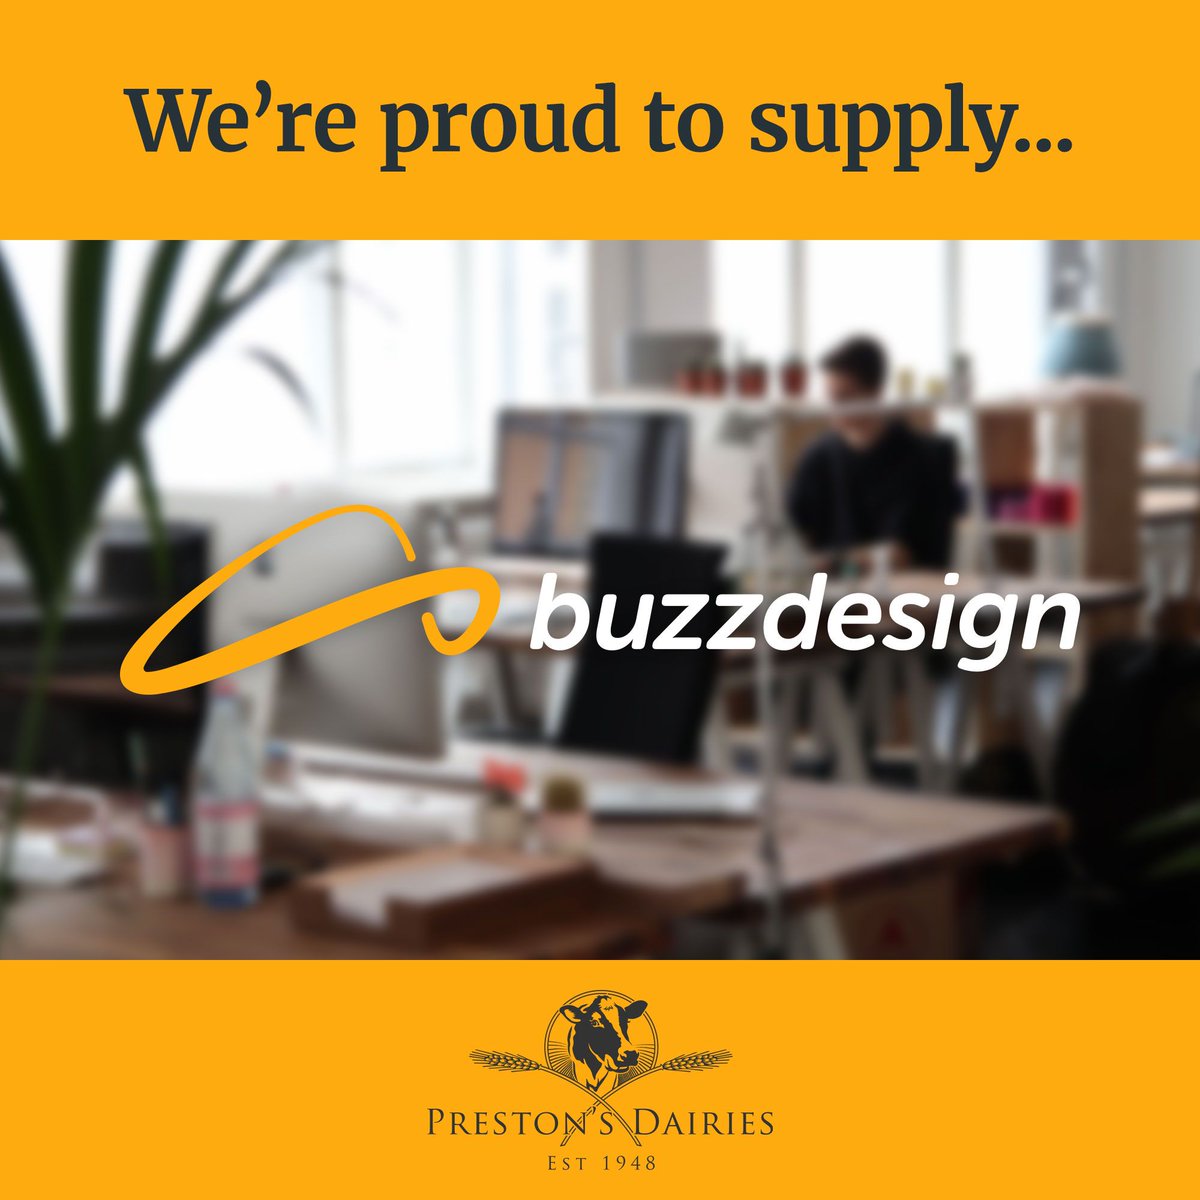 We’re proud to supply Buzz Design in #Liversedge. 🎨 These graphic designers create fantastic logos, websites, brochures, packaging, and much more. 👉 buff.ly/4ajzaKi #SundayFunday #SundayBrunch #MilkmanService #DailyDelivery #LocalProduce #SupportLocalBusinesses